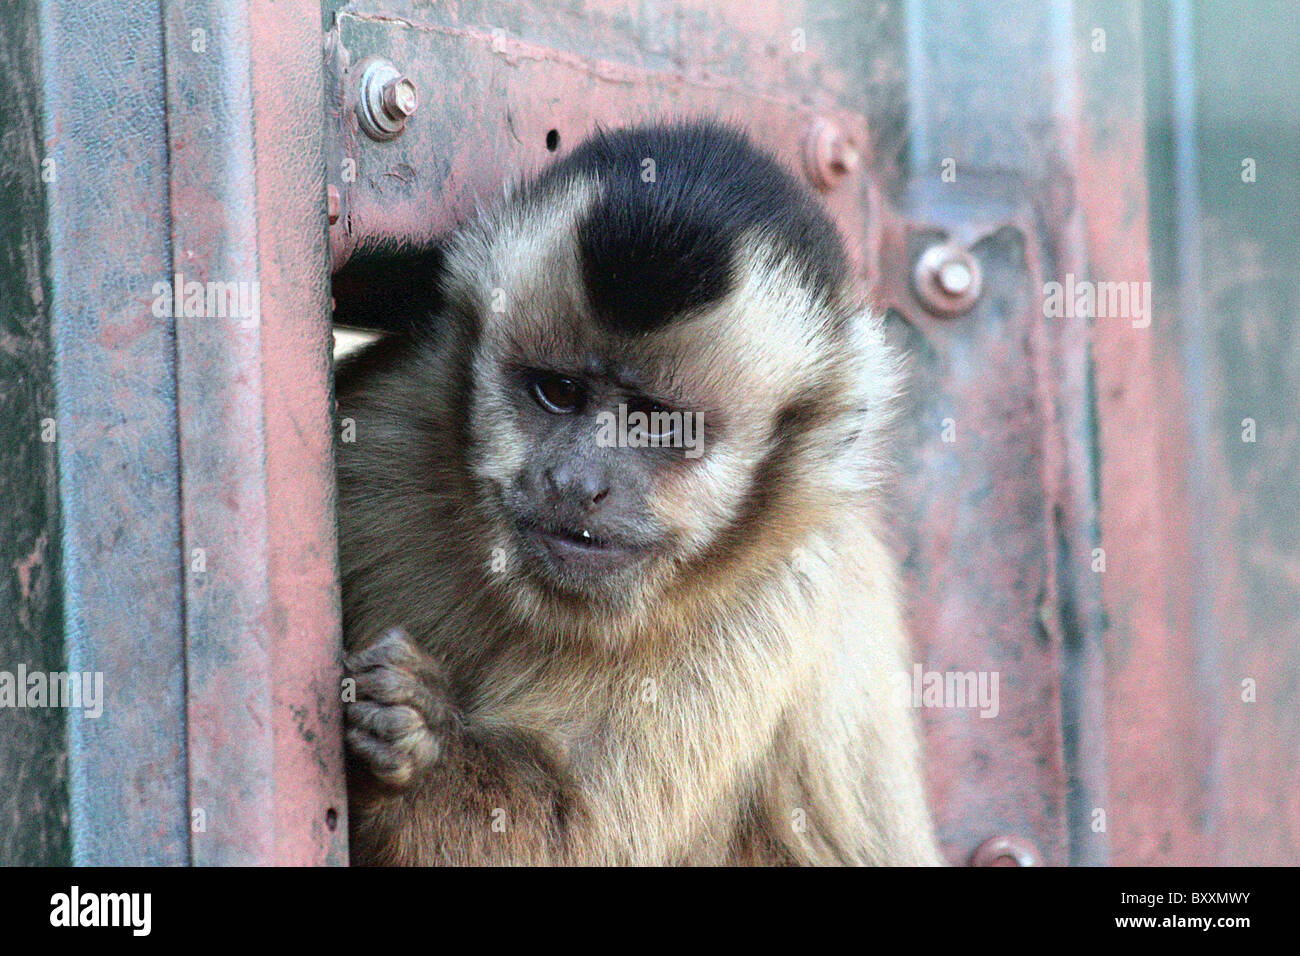 Brown capuchin monkey peeping out the door Stock Photo